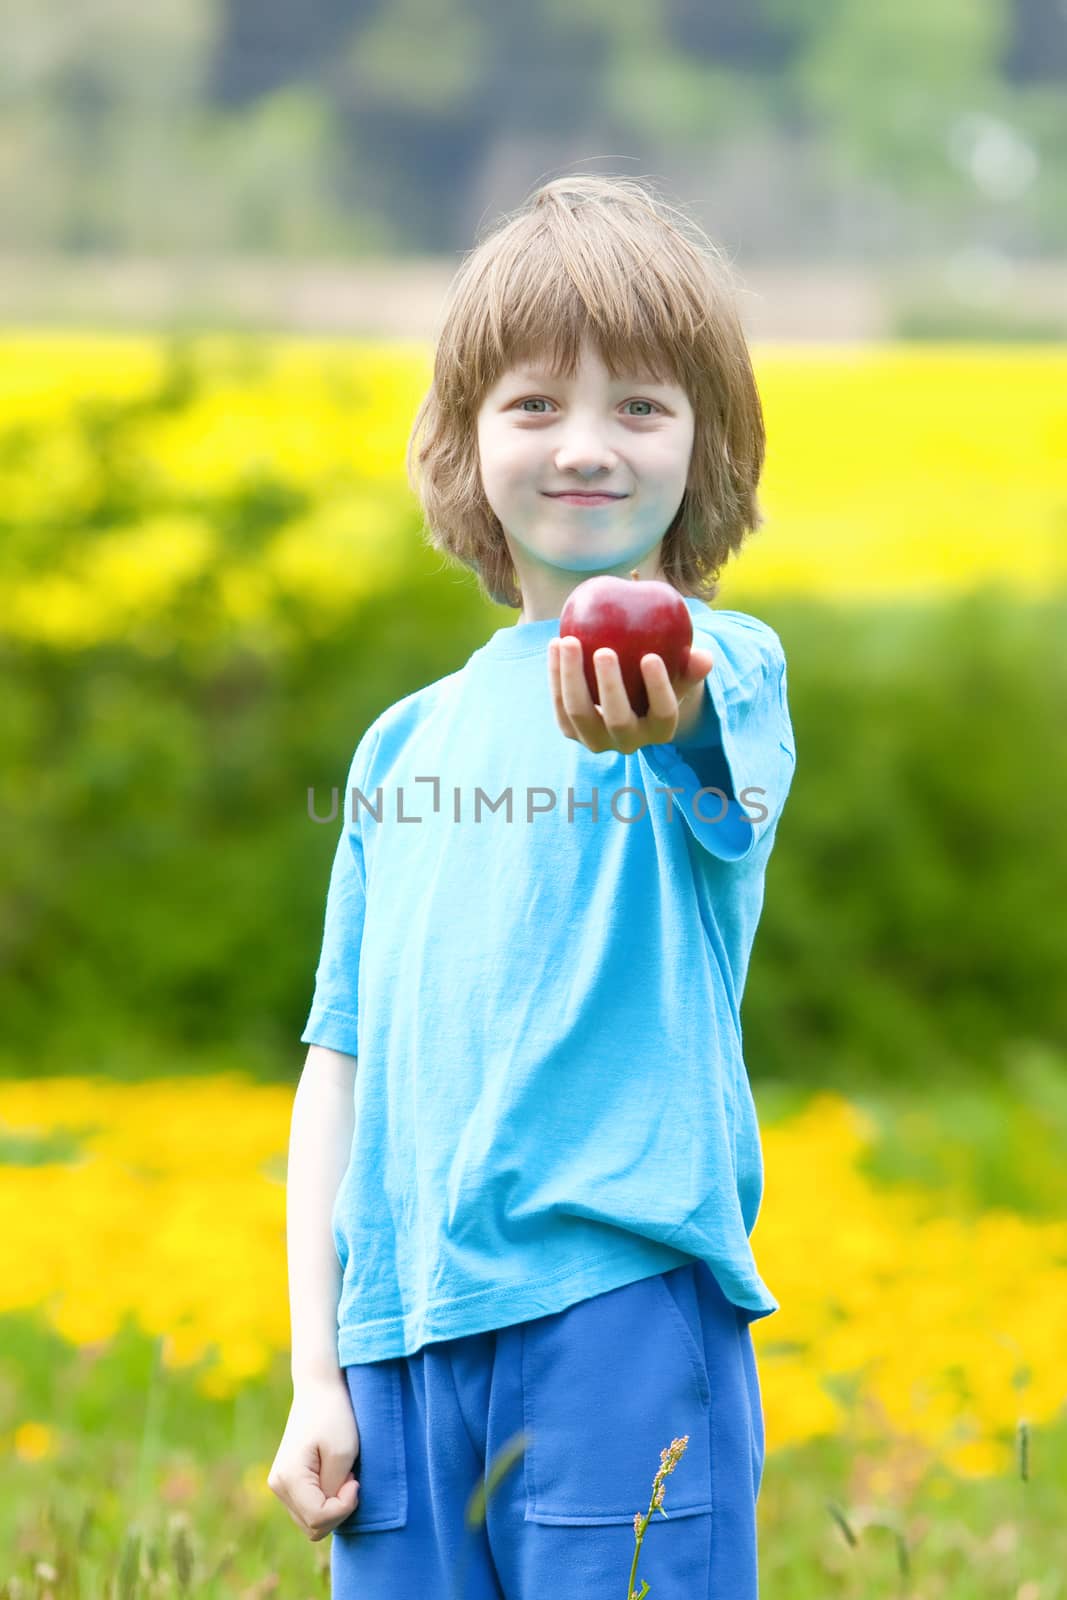 Boy Holding Red Apple in the Garden Offering